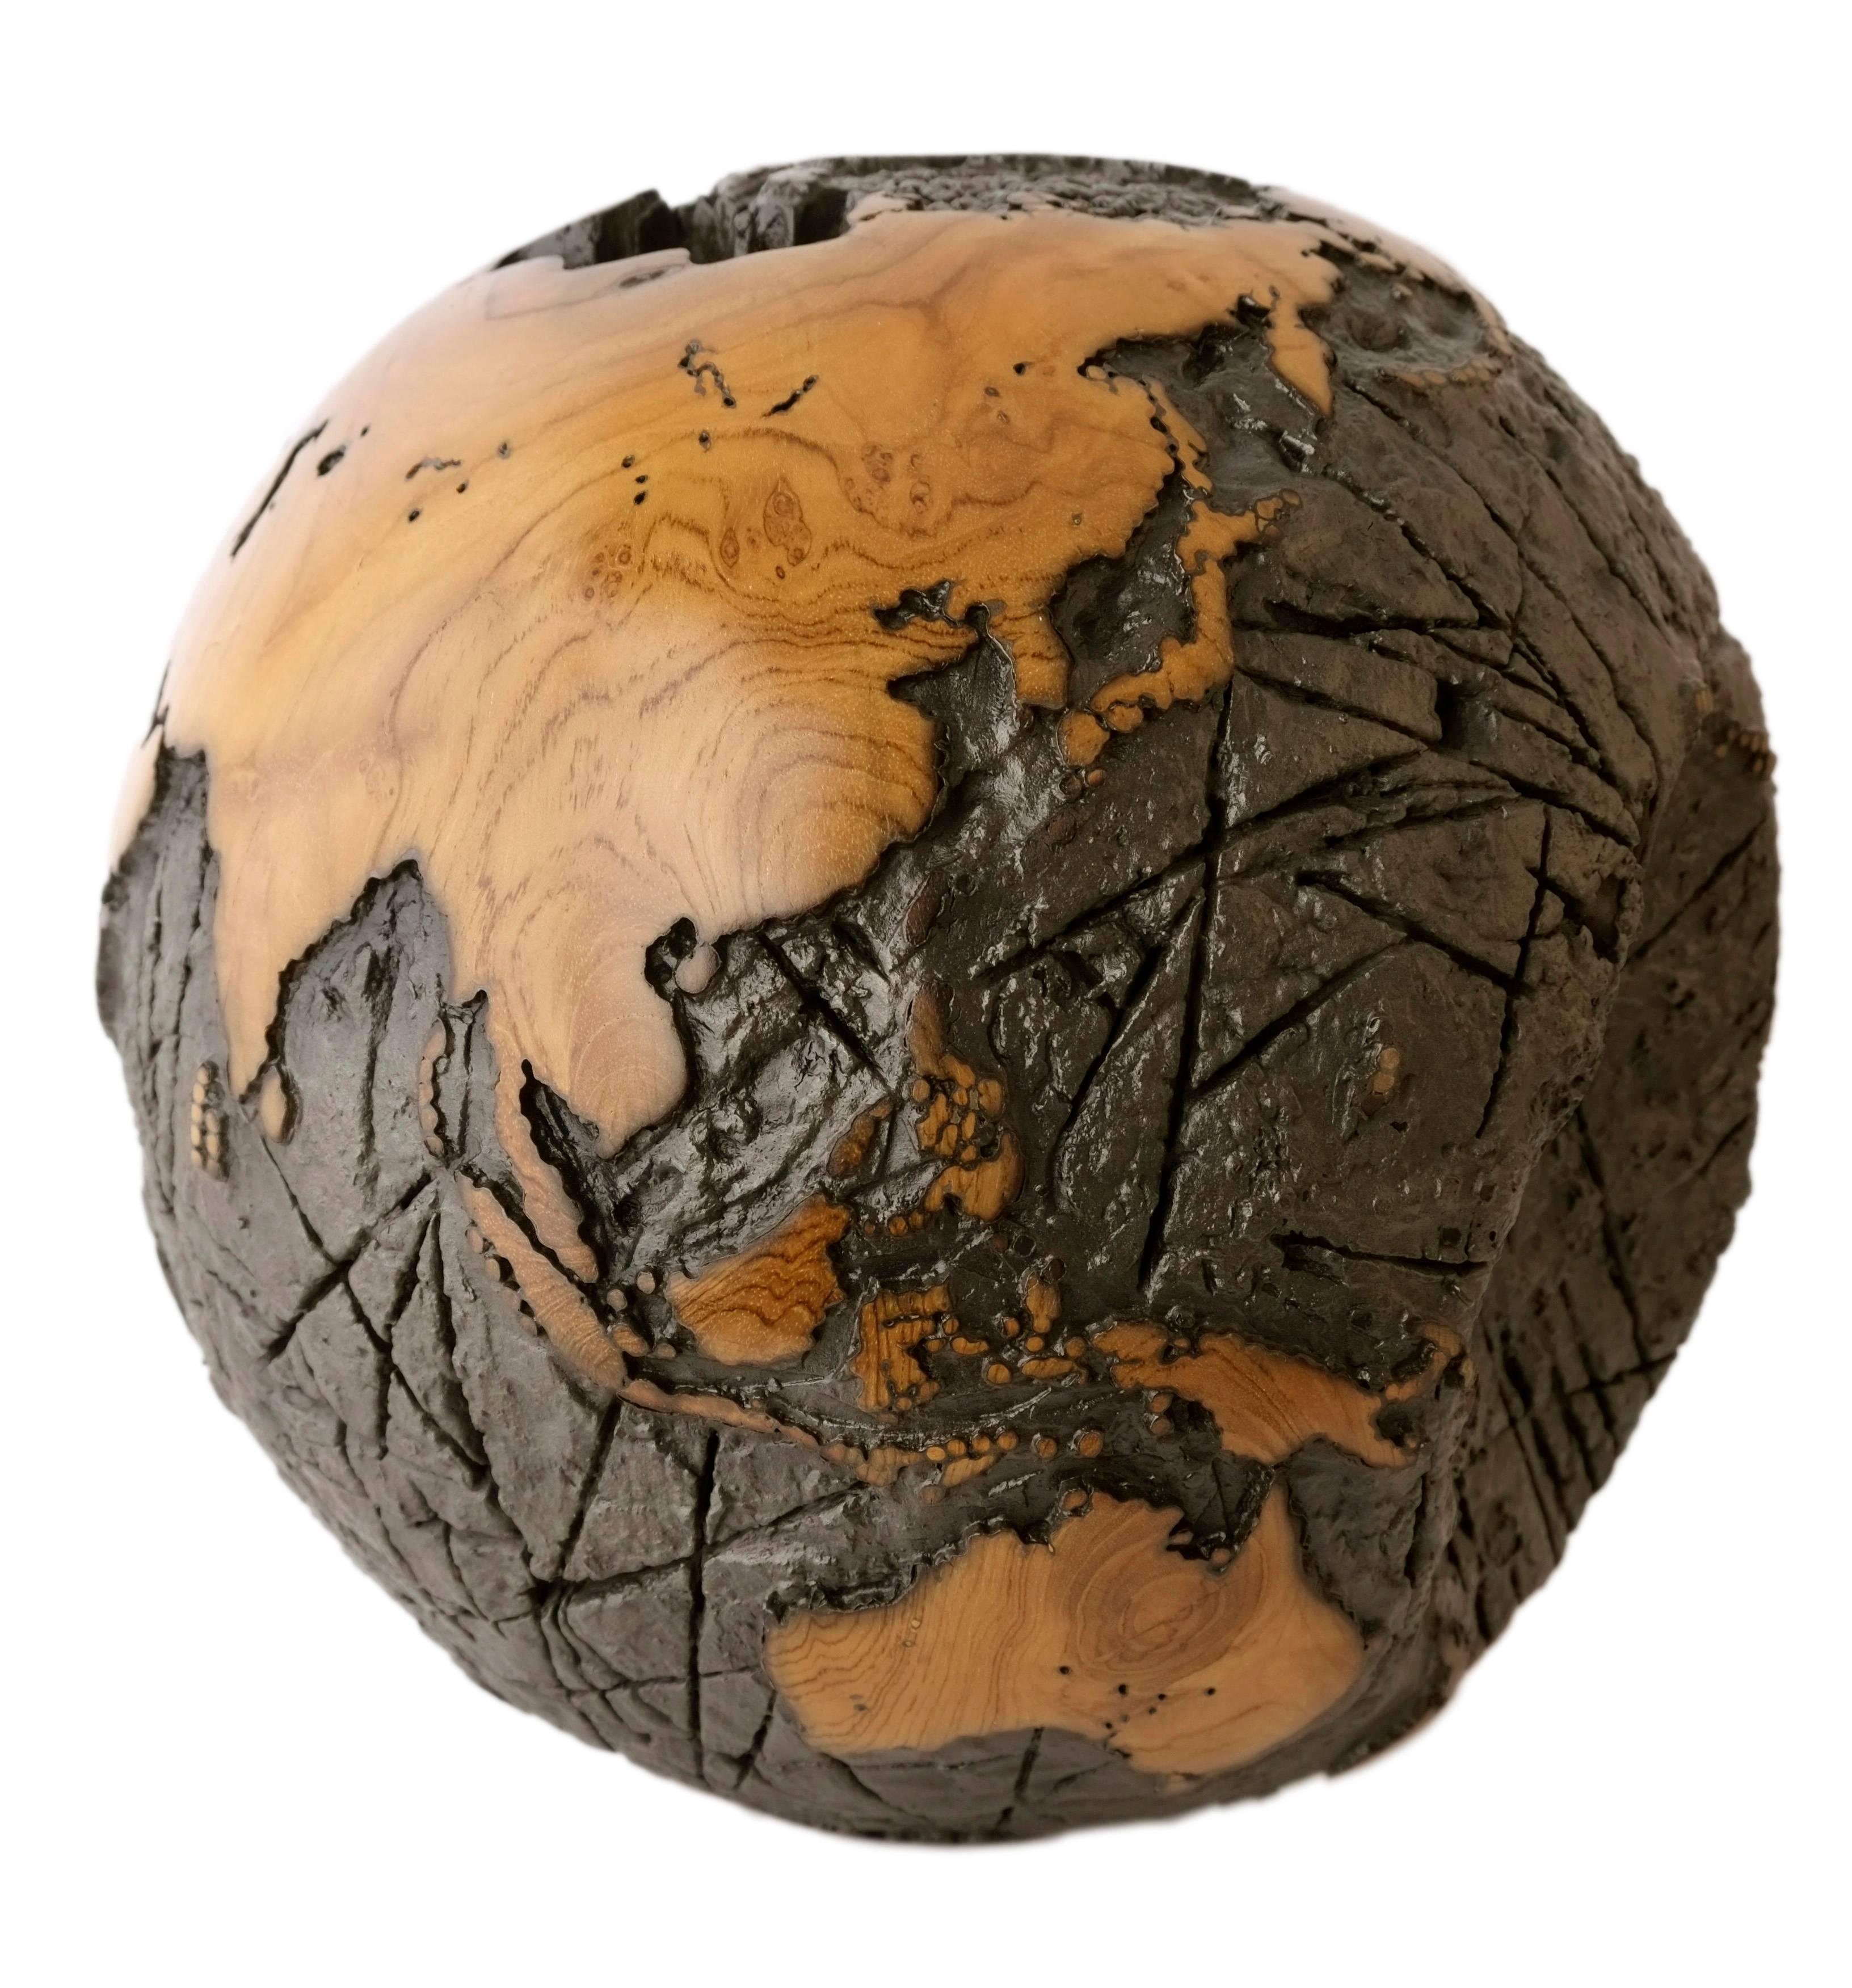 Balinese Wooden globe made of teak root and metal with cold lava flow texture, 30 cm